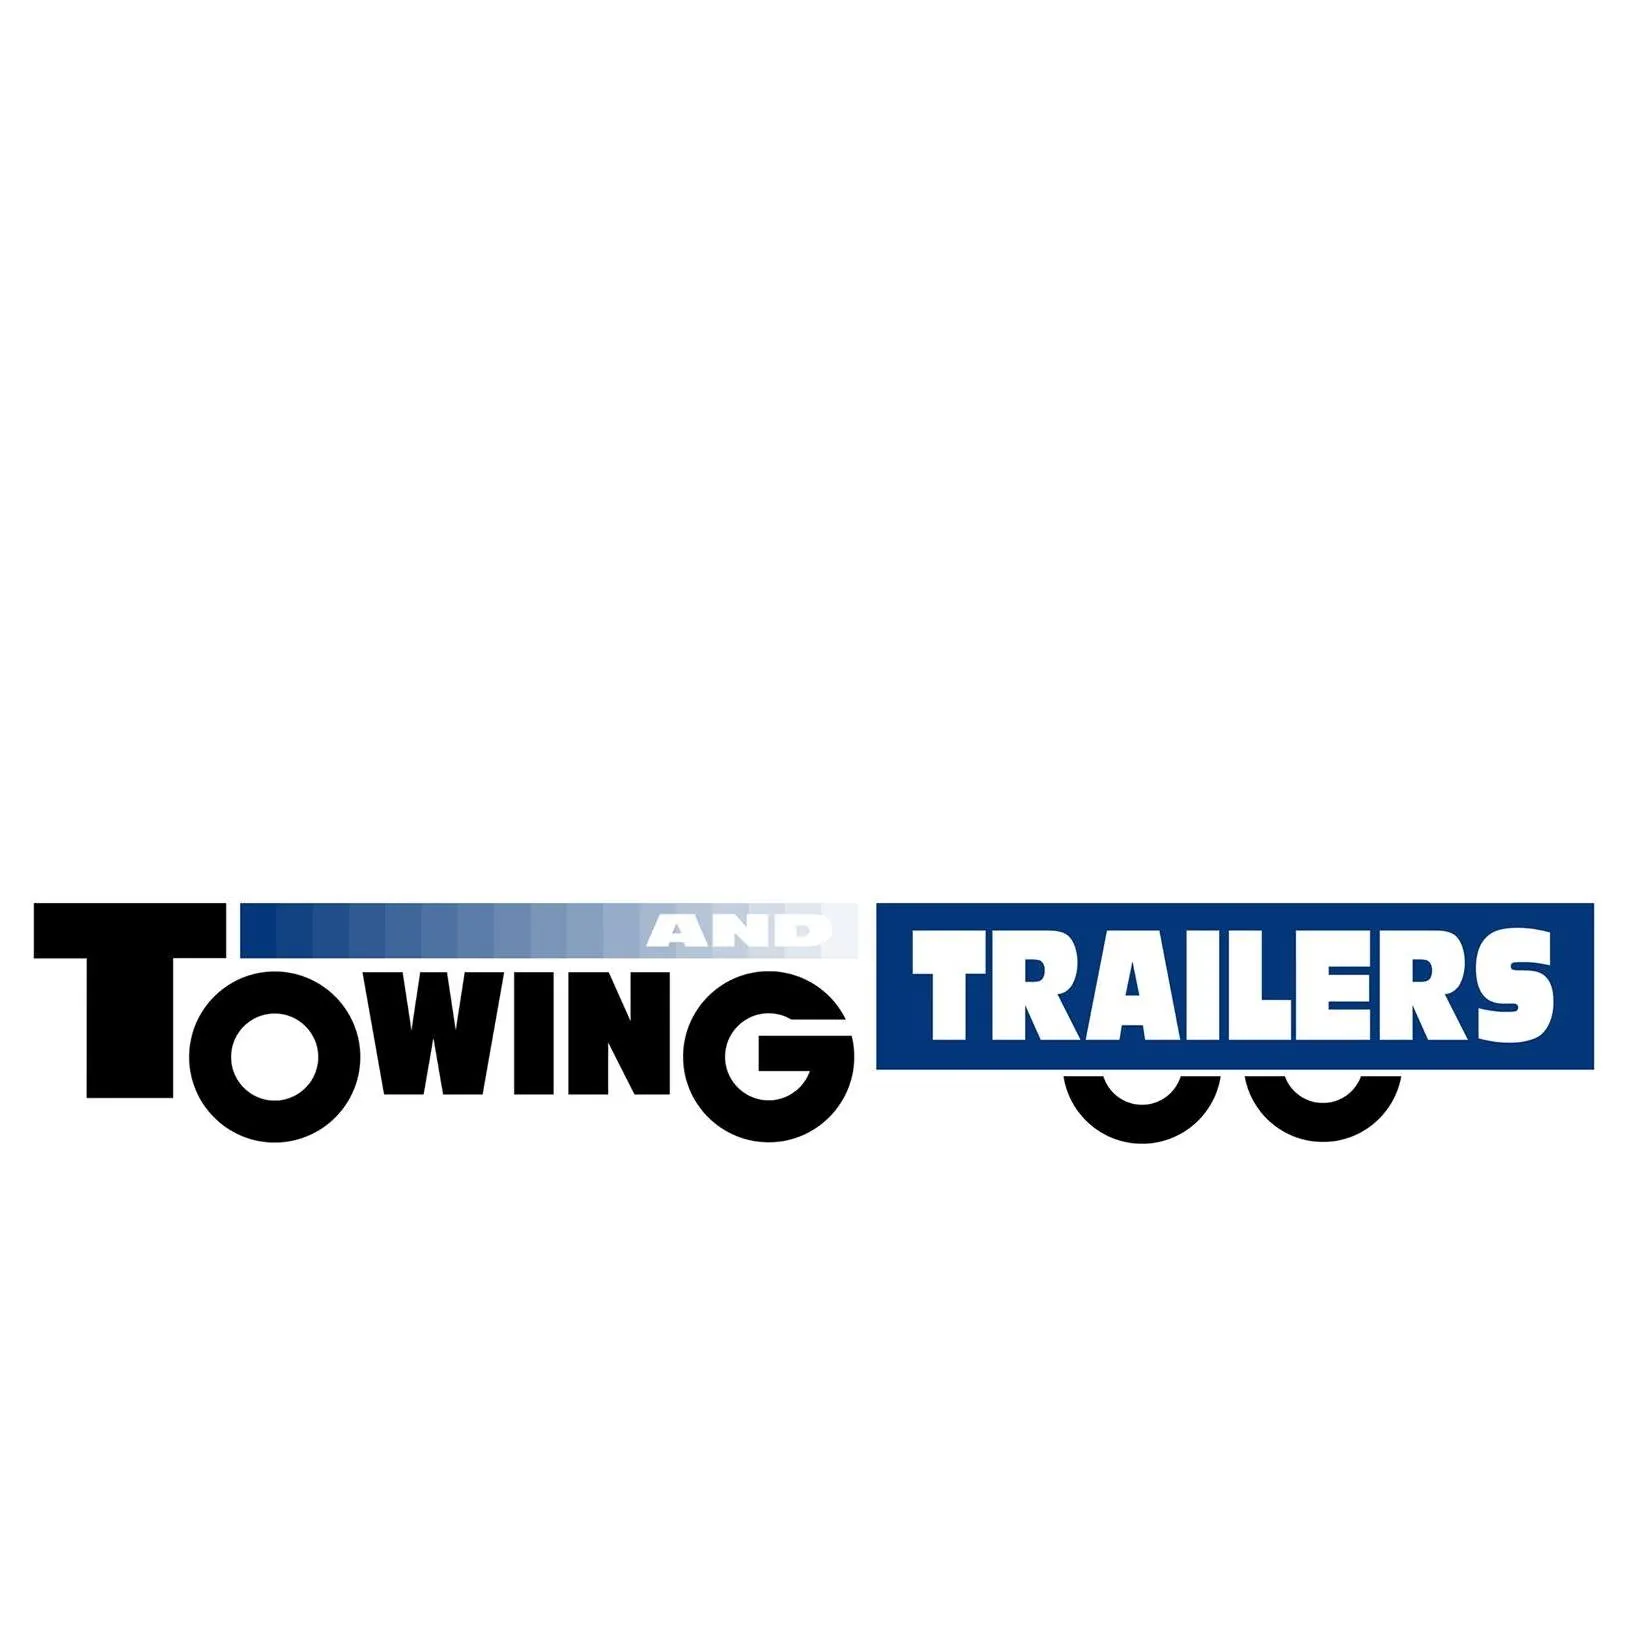 Towing And Trailers Voucher Codes 